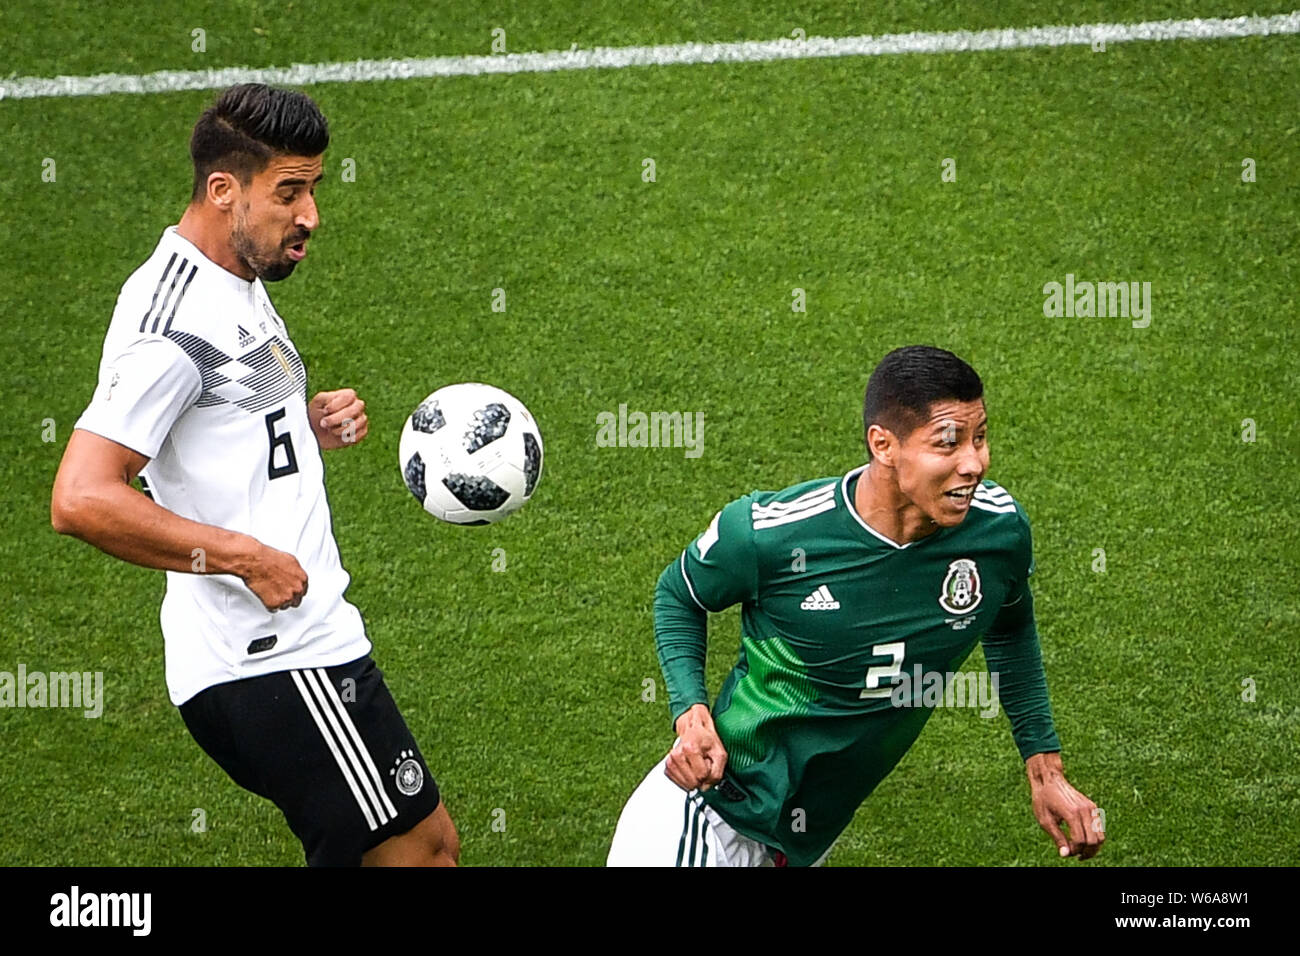 Hugo Ayala of Mexico, right, challenges Sami Khedira of Germany in their Group F match during the 2018 FIFA World Cup in Moscow, Russia, 17 June 2018. Stock Photo